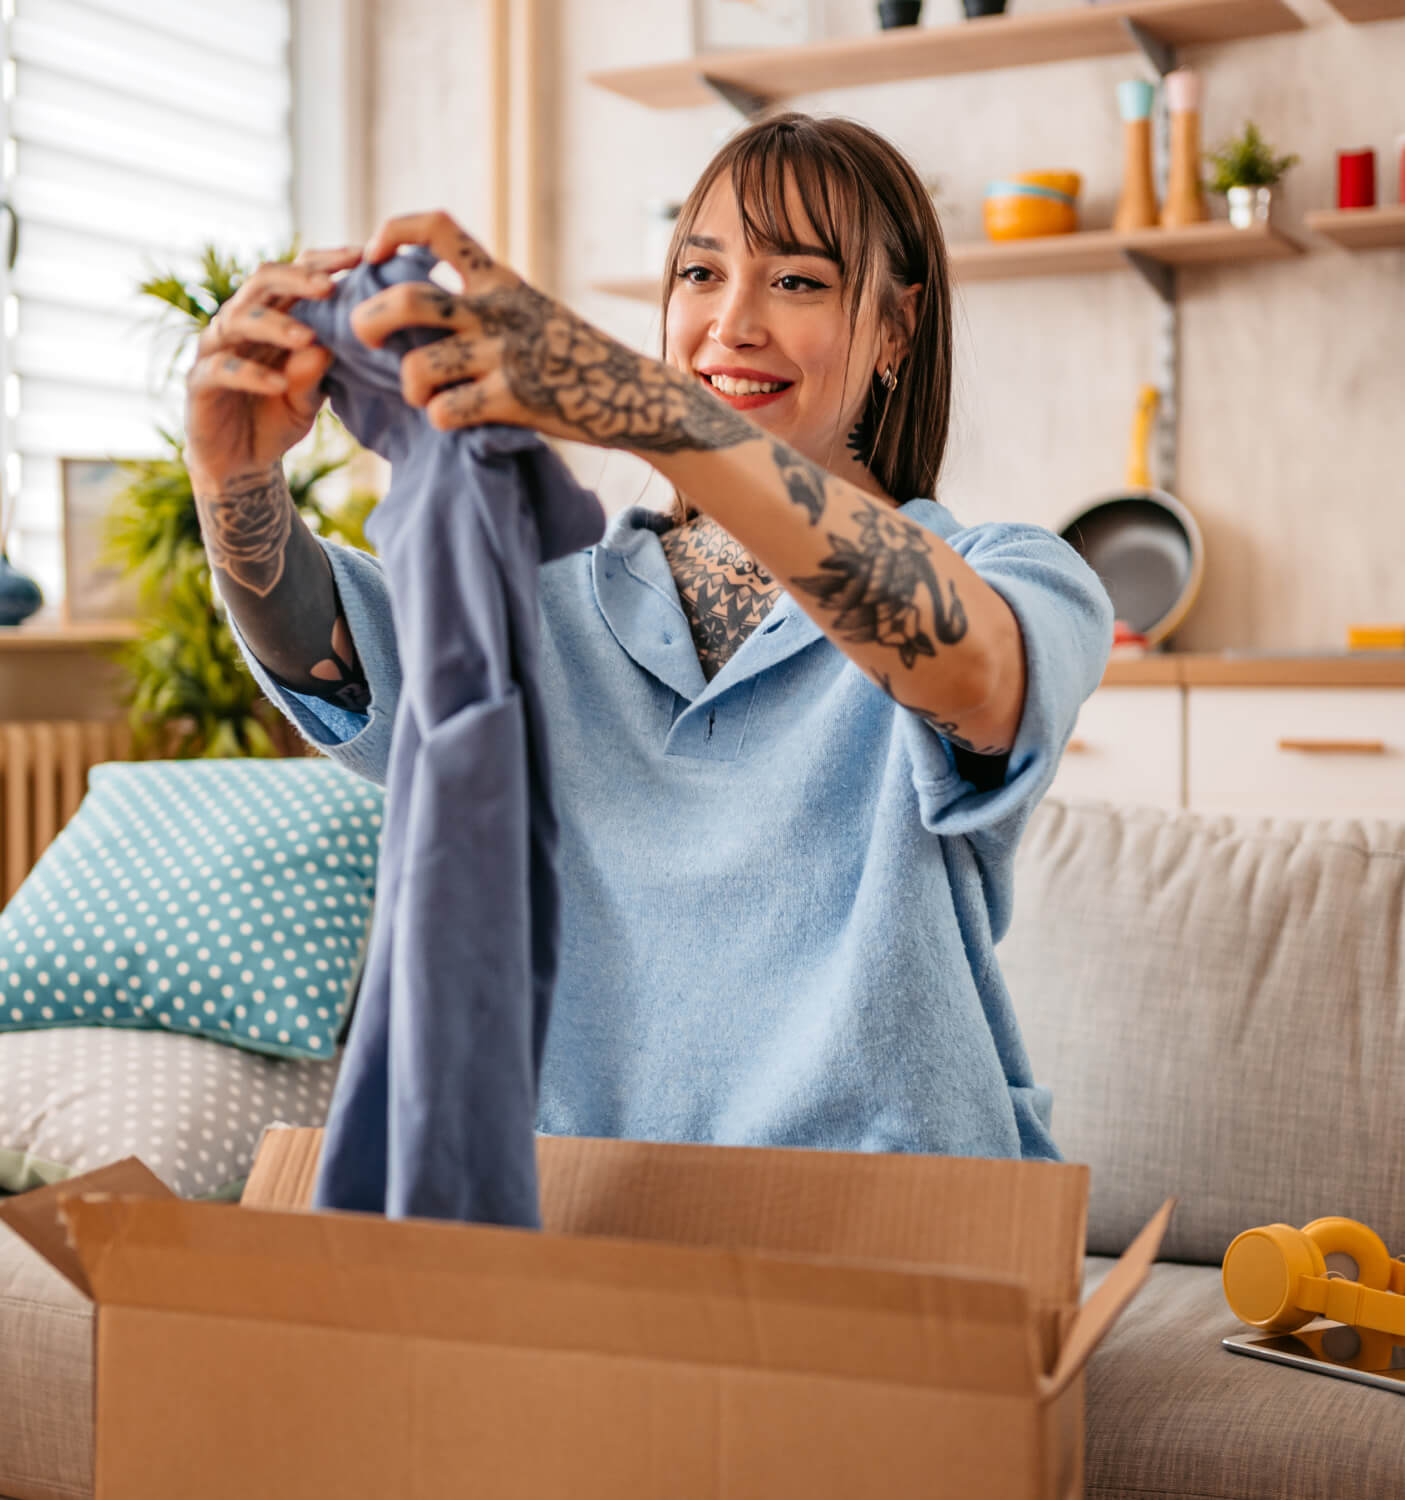 Girl sitting on a couch, opening up a clothing delivery